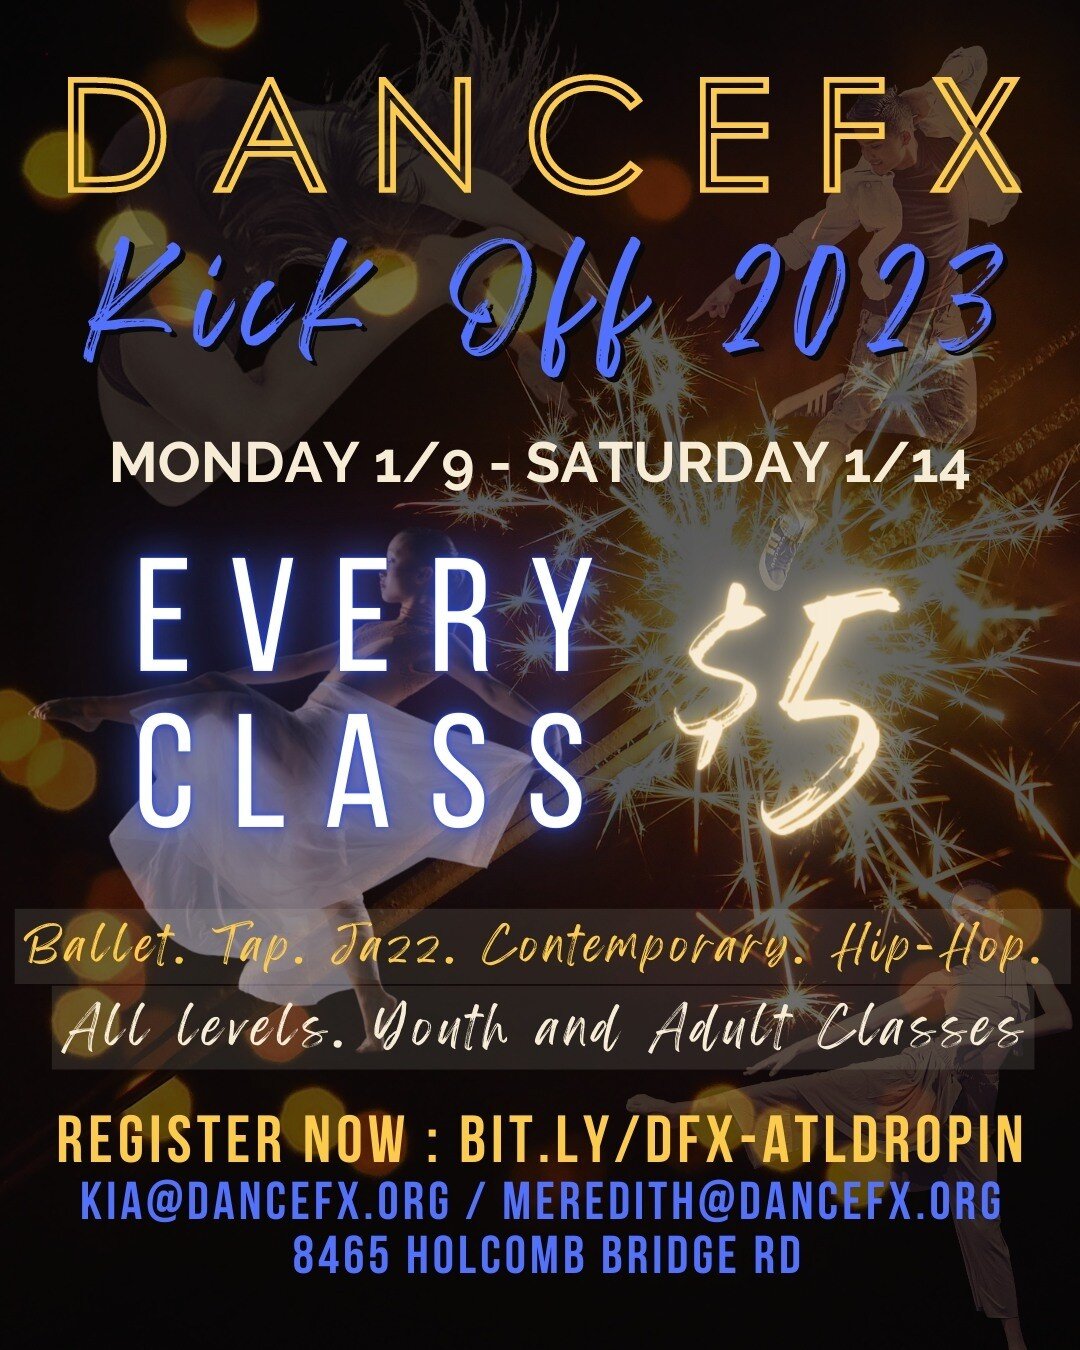 Kick off 2023 at Dancefx
Every class is $5 
Monday 1/9 - Saturday 1/14
Youth and Adult classes
Ballet, Tap, Jazz, Contemporary, HipHop
-- 
Register NOW on our website
Have questions? 
For more info, email 
kia@dancefx.org / meredith@dancefx.org